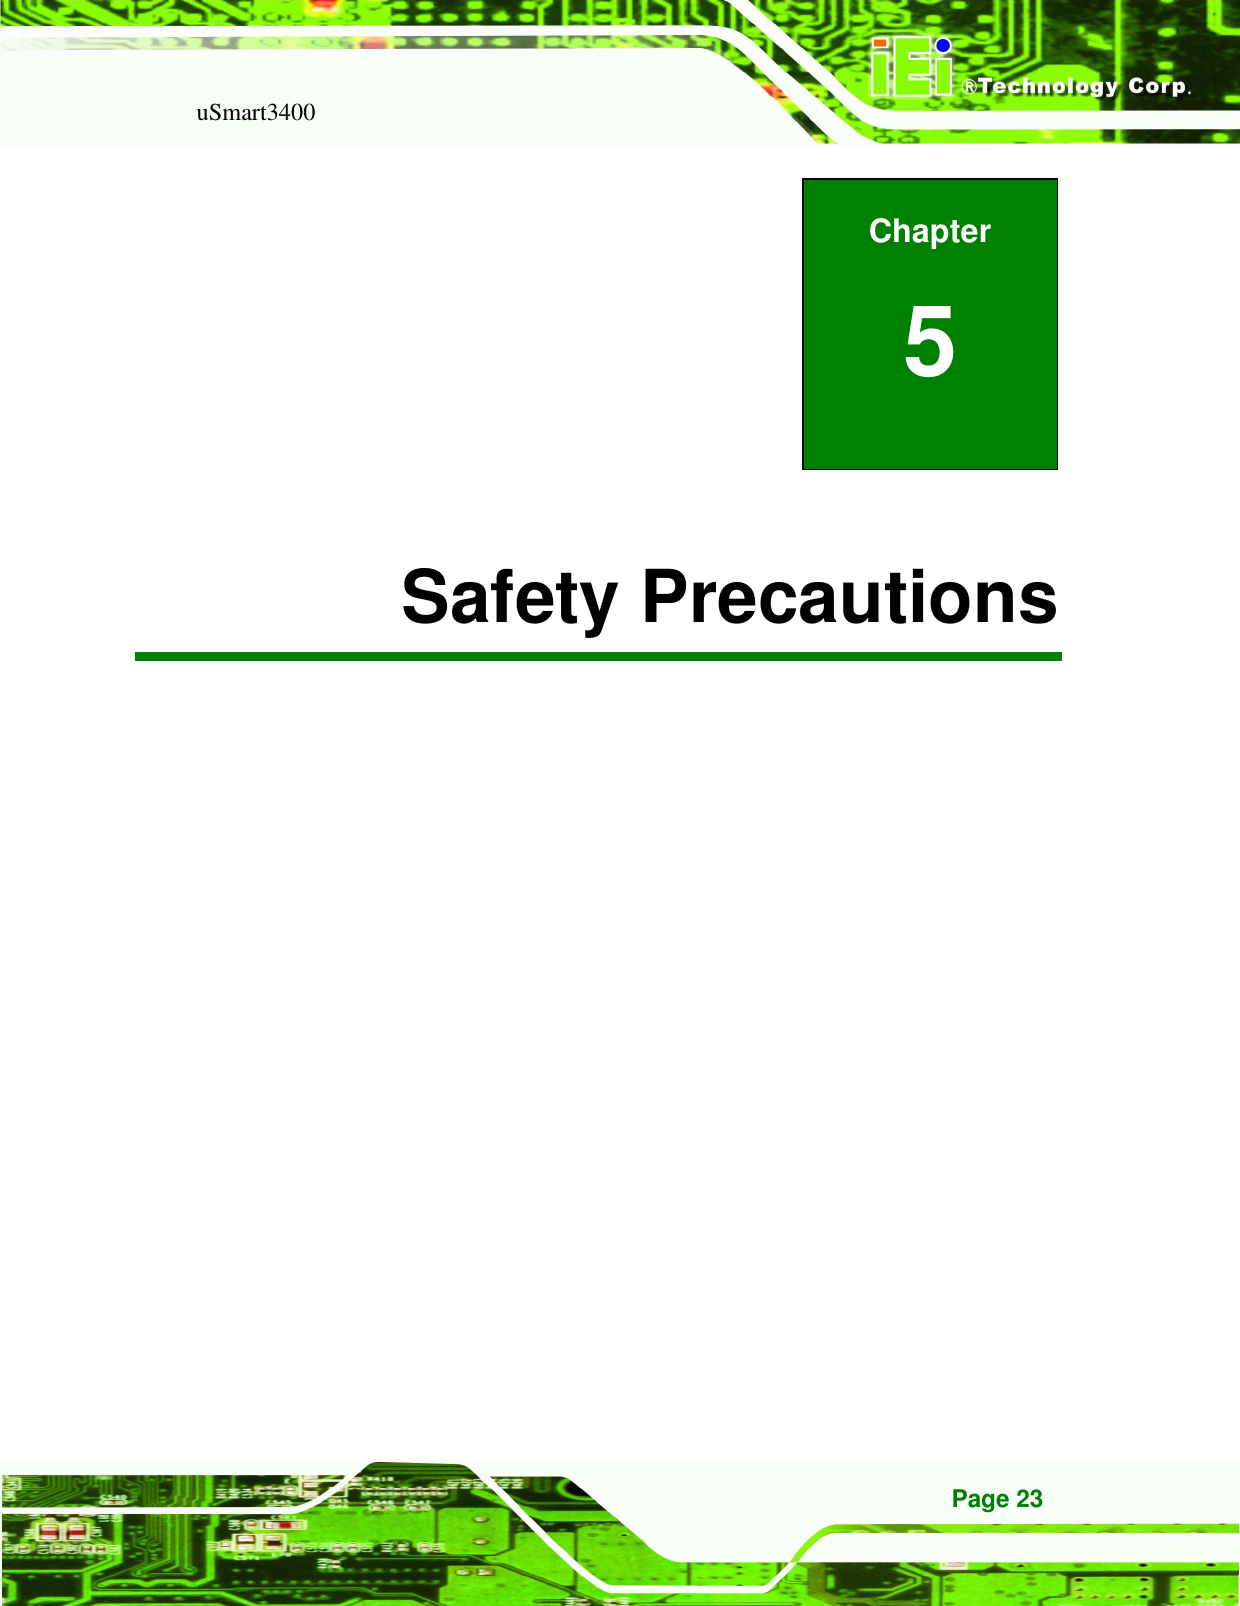   uSmart3400 Page 23          A Safety Precautions Chapter 5 